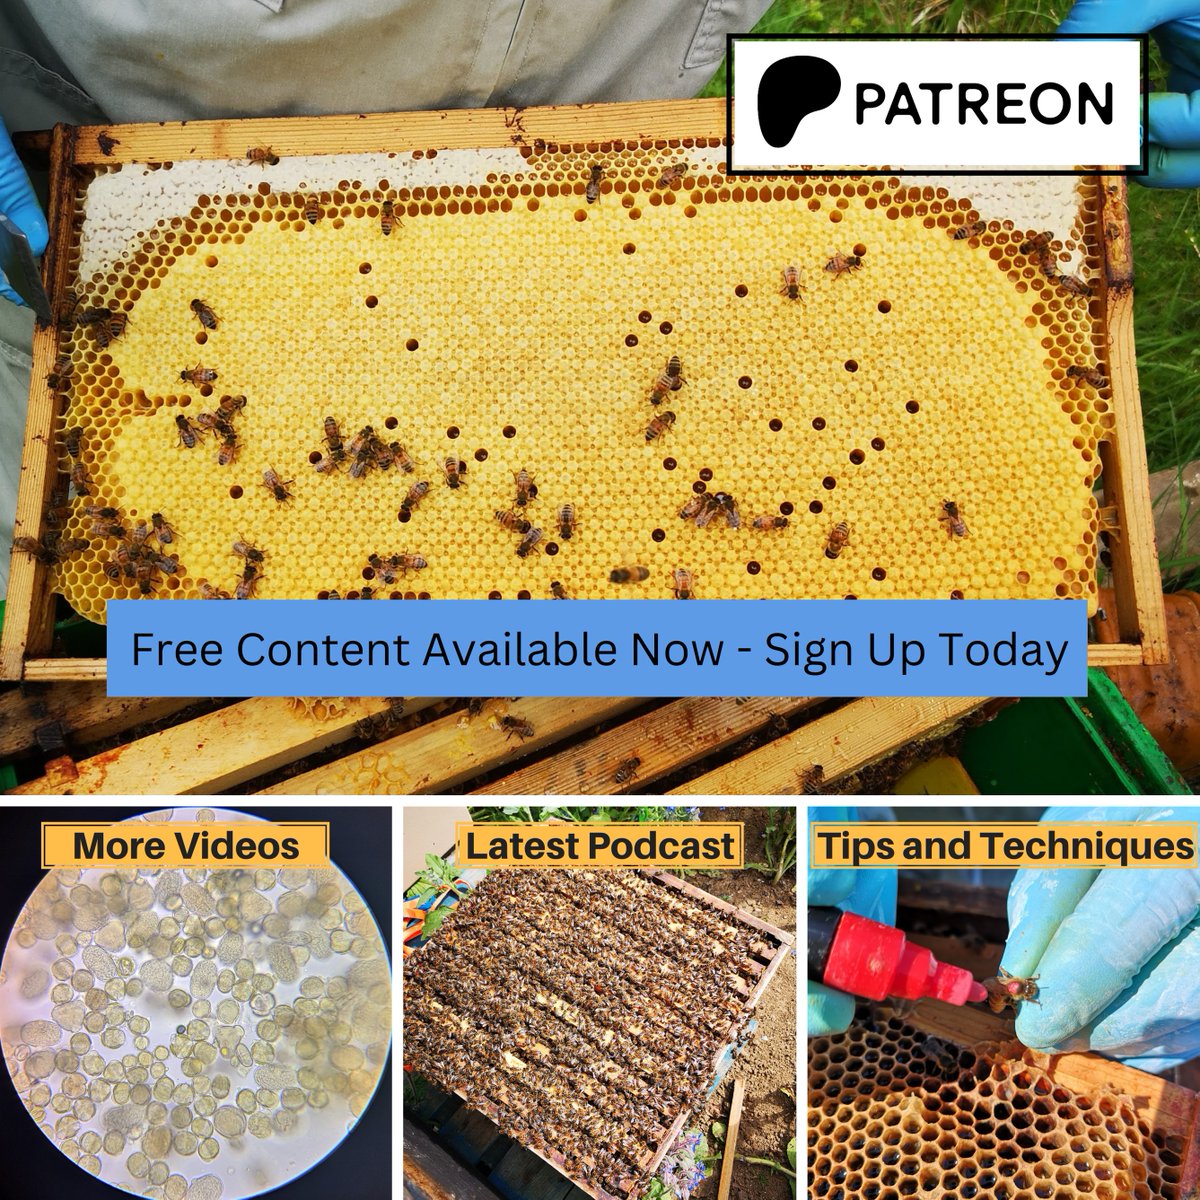 Check out my latest tips and techniques. Sign up today for free. patreon.com/norfolkhoney